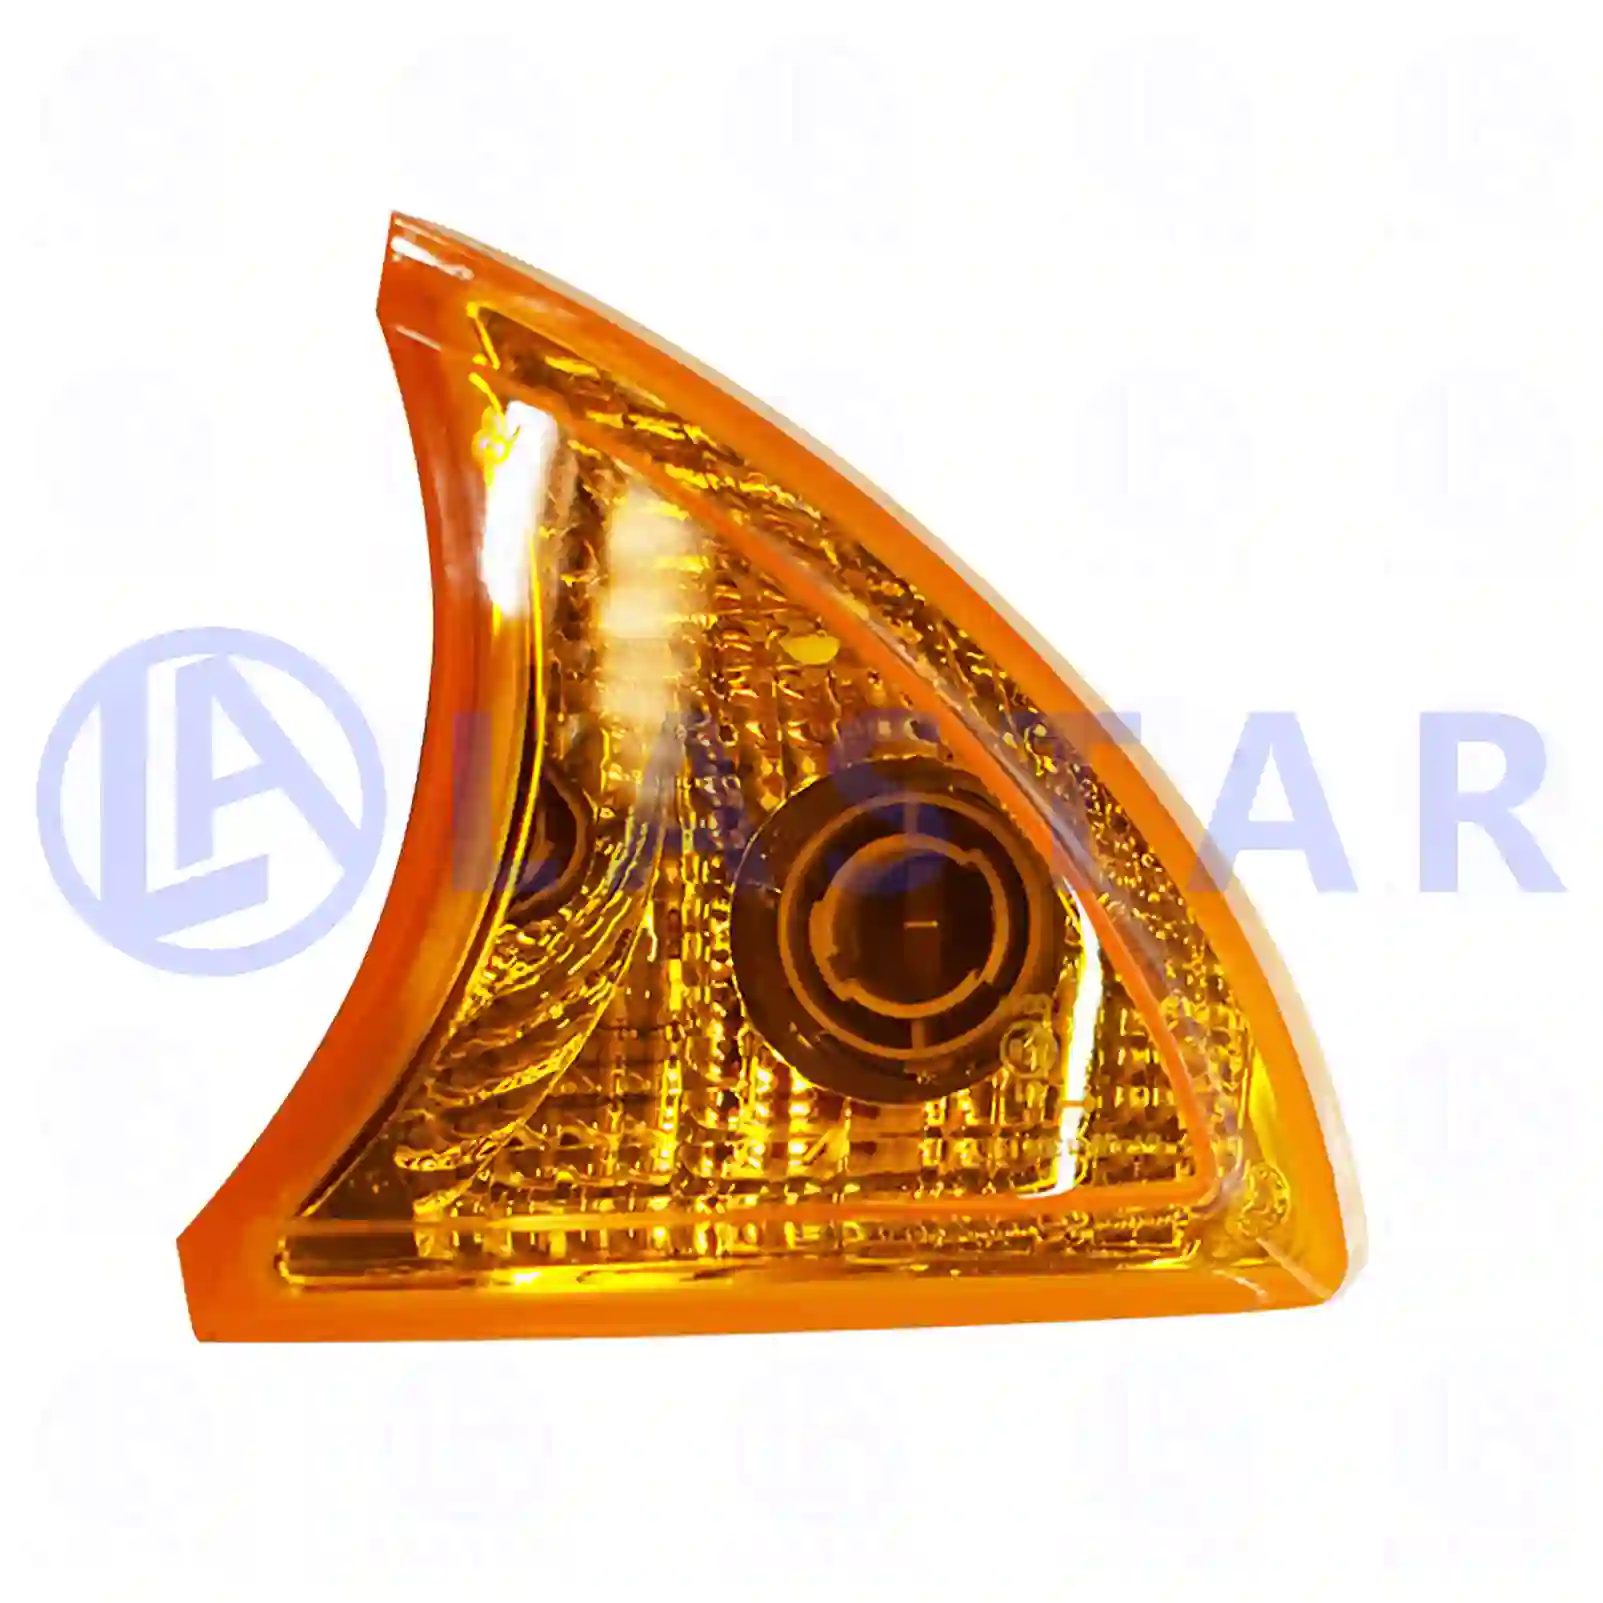 Turn signal lamp, left, without bulb, 77712446, 42555042, 504187902, 5801755124, ZG21195-0008 ||  77712446 Lastar Spare Part | Truck Spare Parts, Auotomotive Spare Parts Turn signal lamp, left, without bulb, 77712446, 42555042, 504187902, 5801755124, ZG21195-0008 ||  77712446 Lastar Spare Part | Truck Spare Parts, Auotomotive Spare Parts